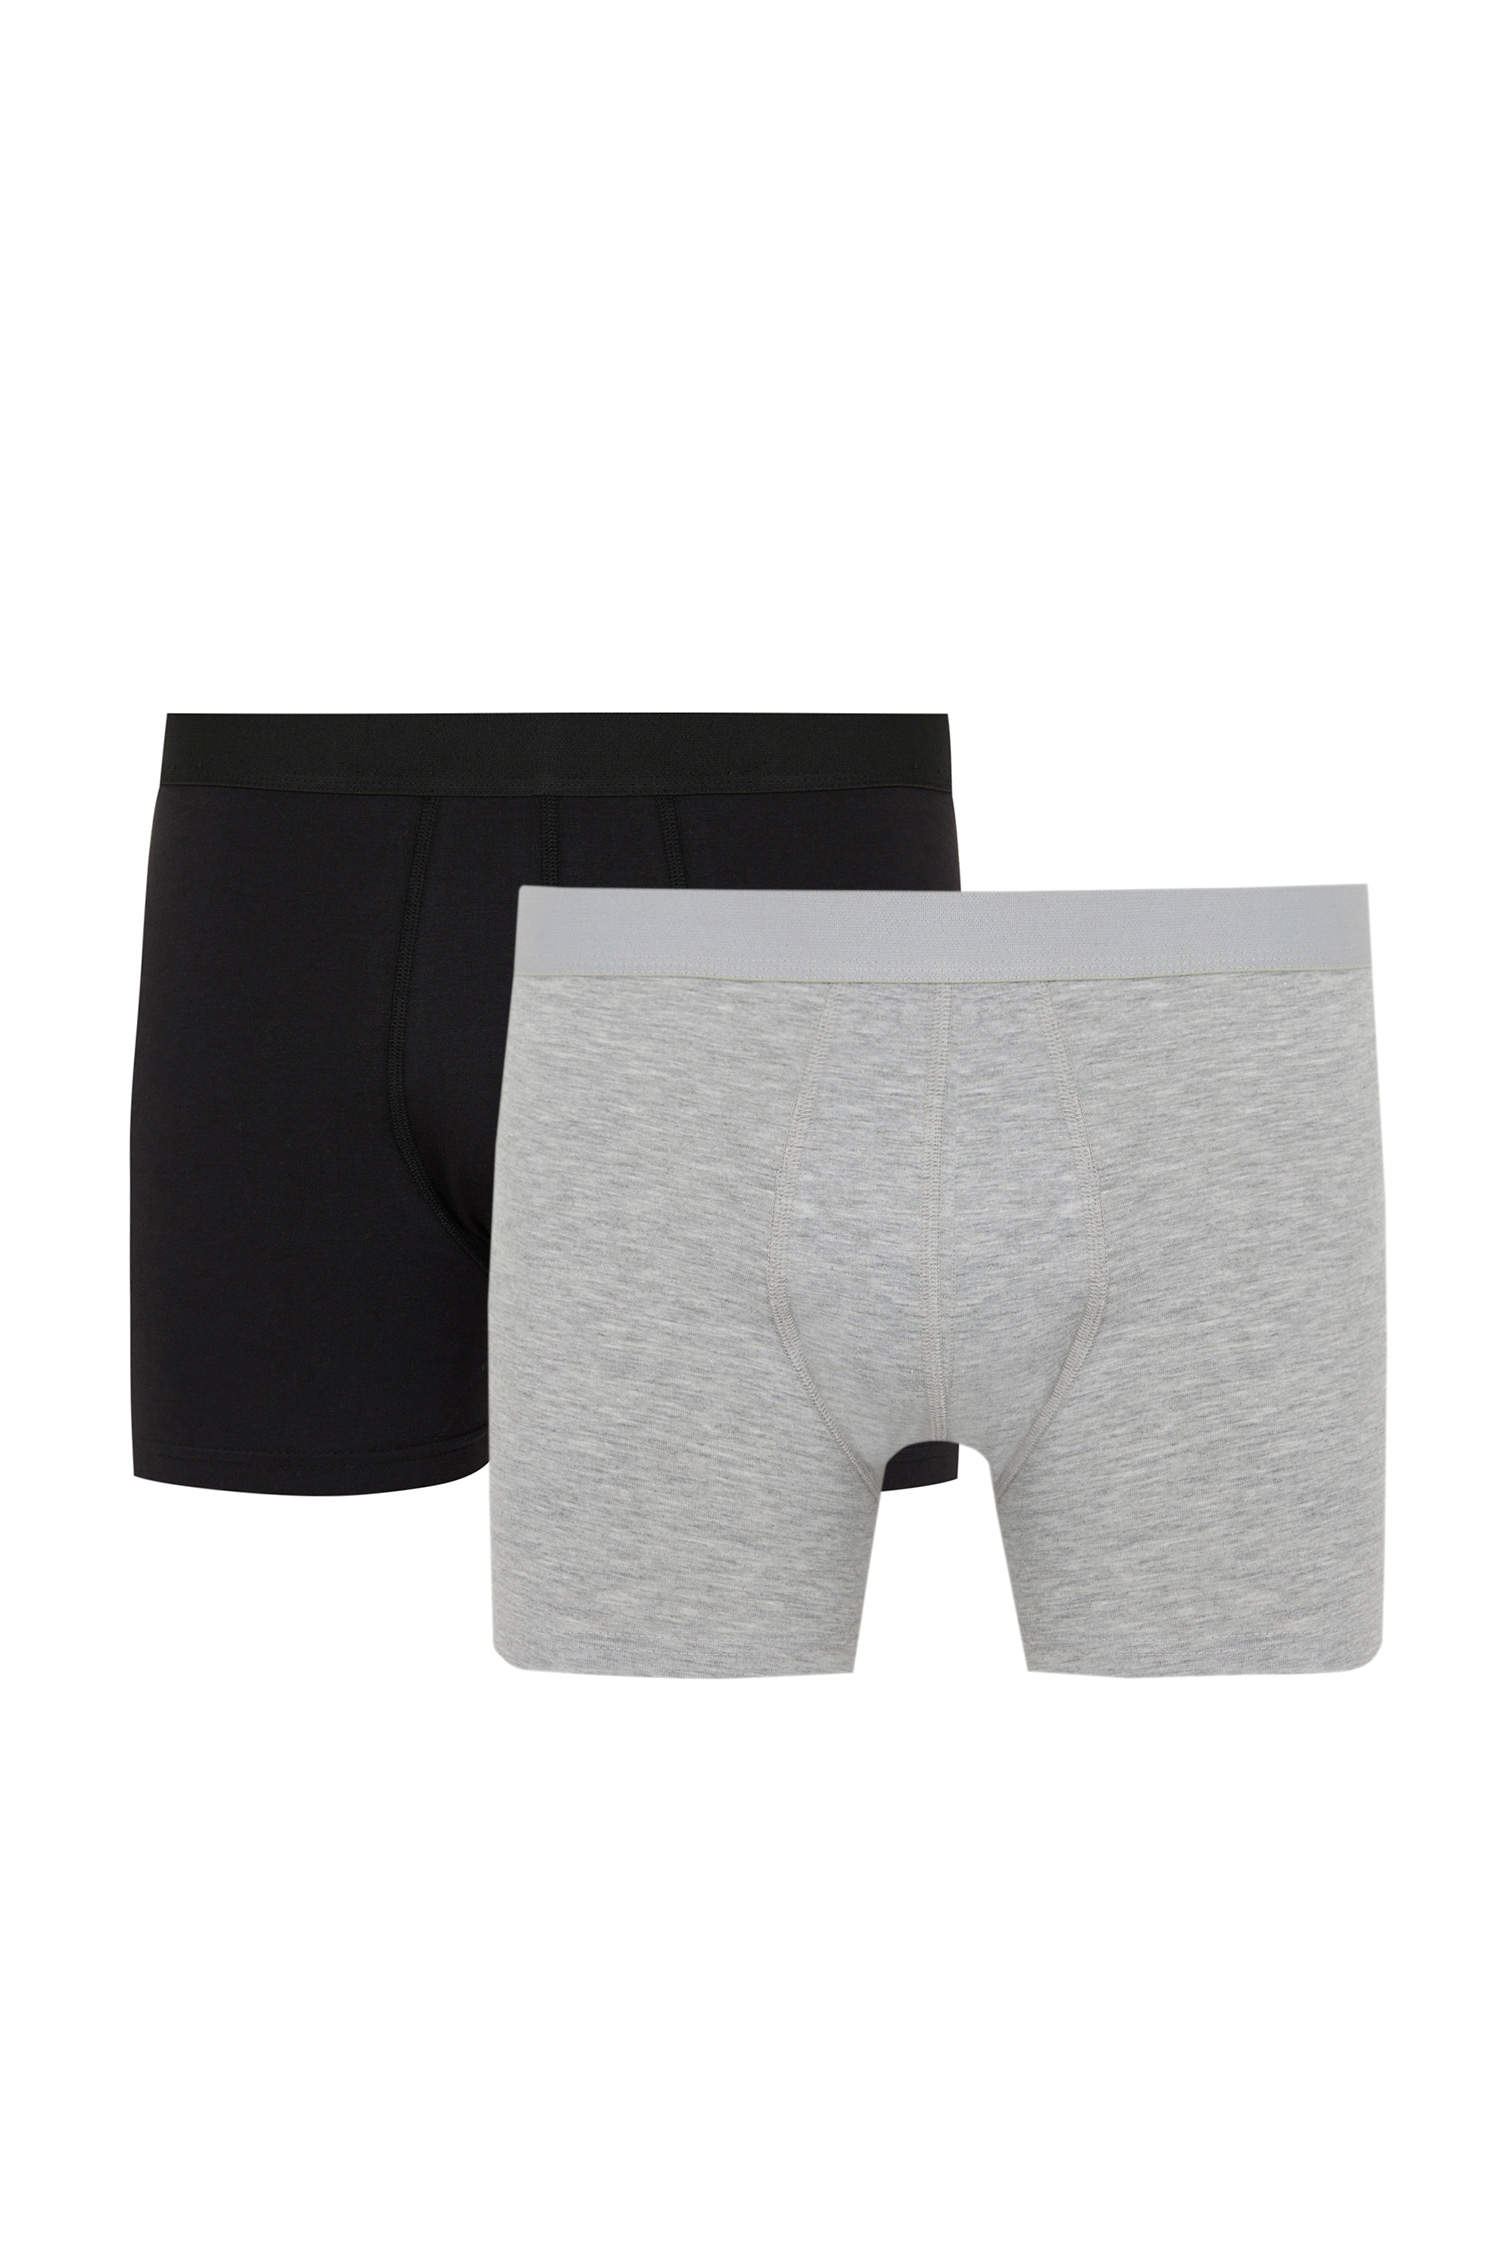 White Boxer Brief underpants 3-Pack - Bread & Boxers